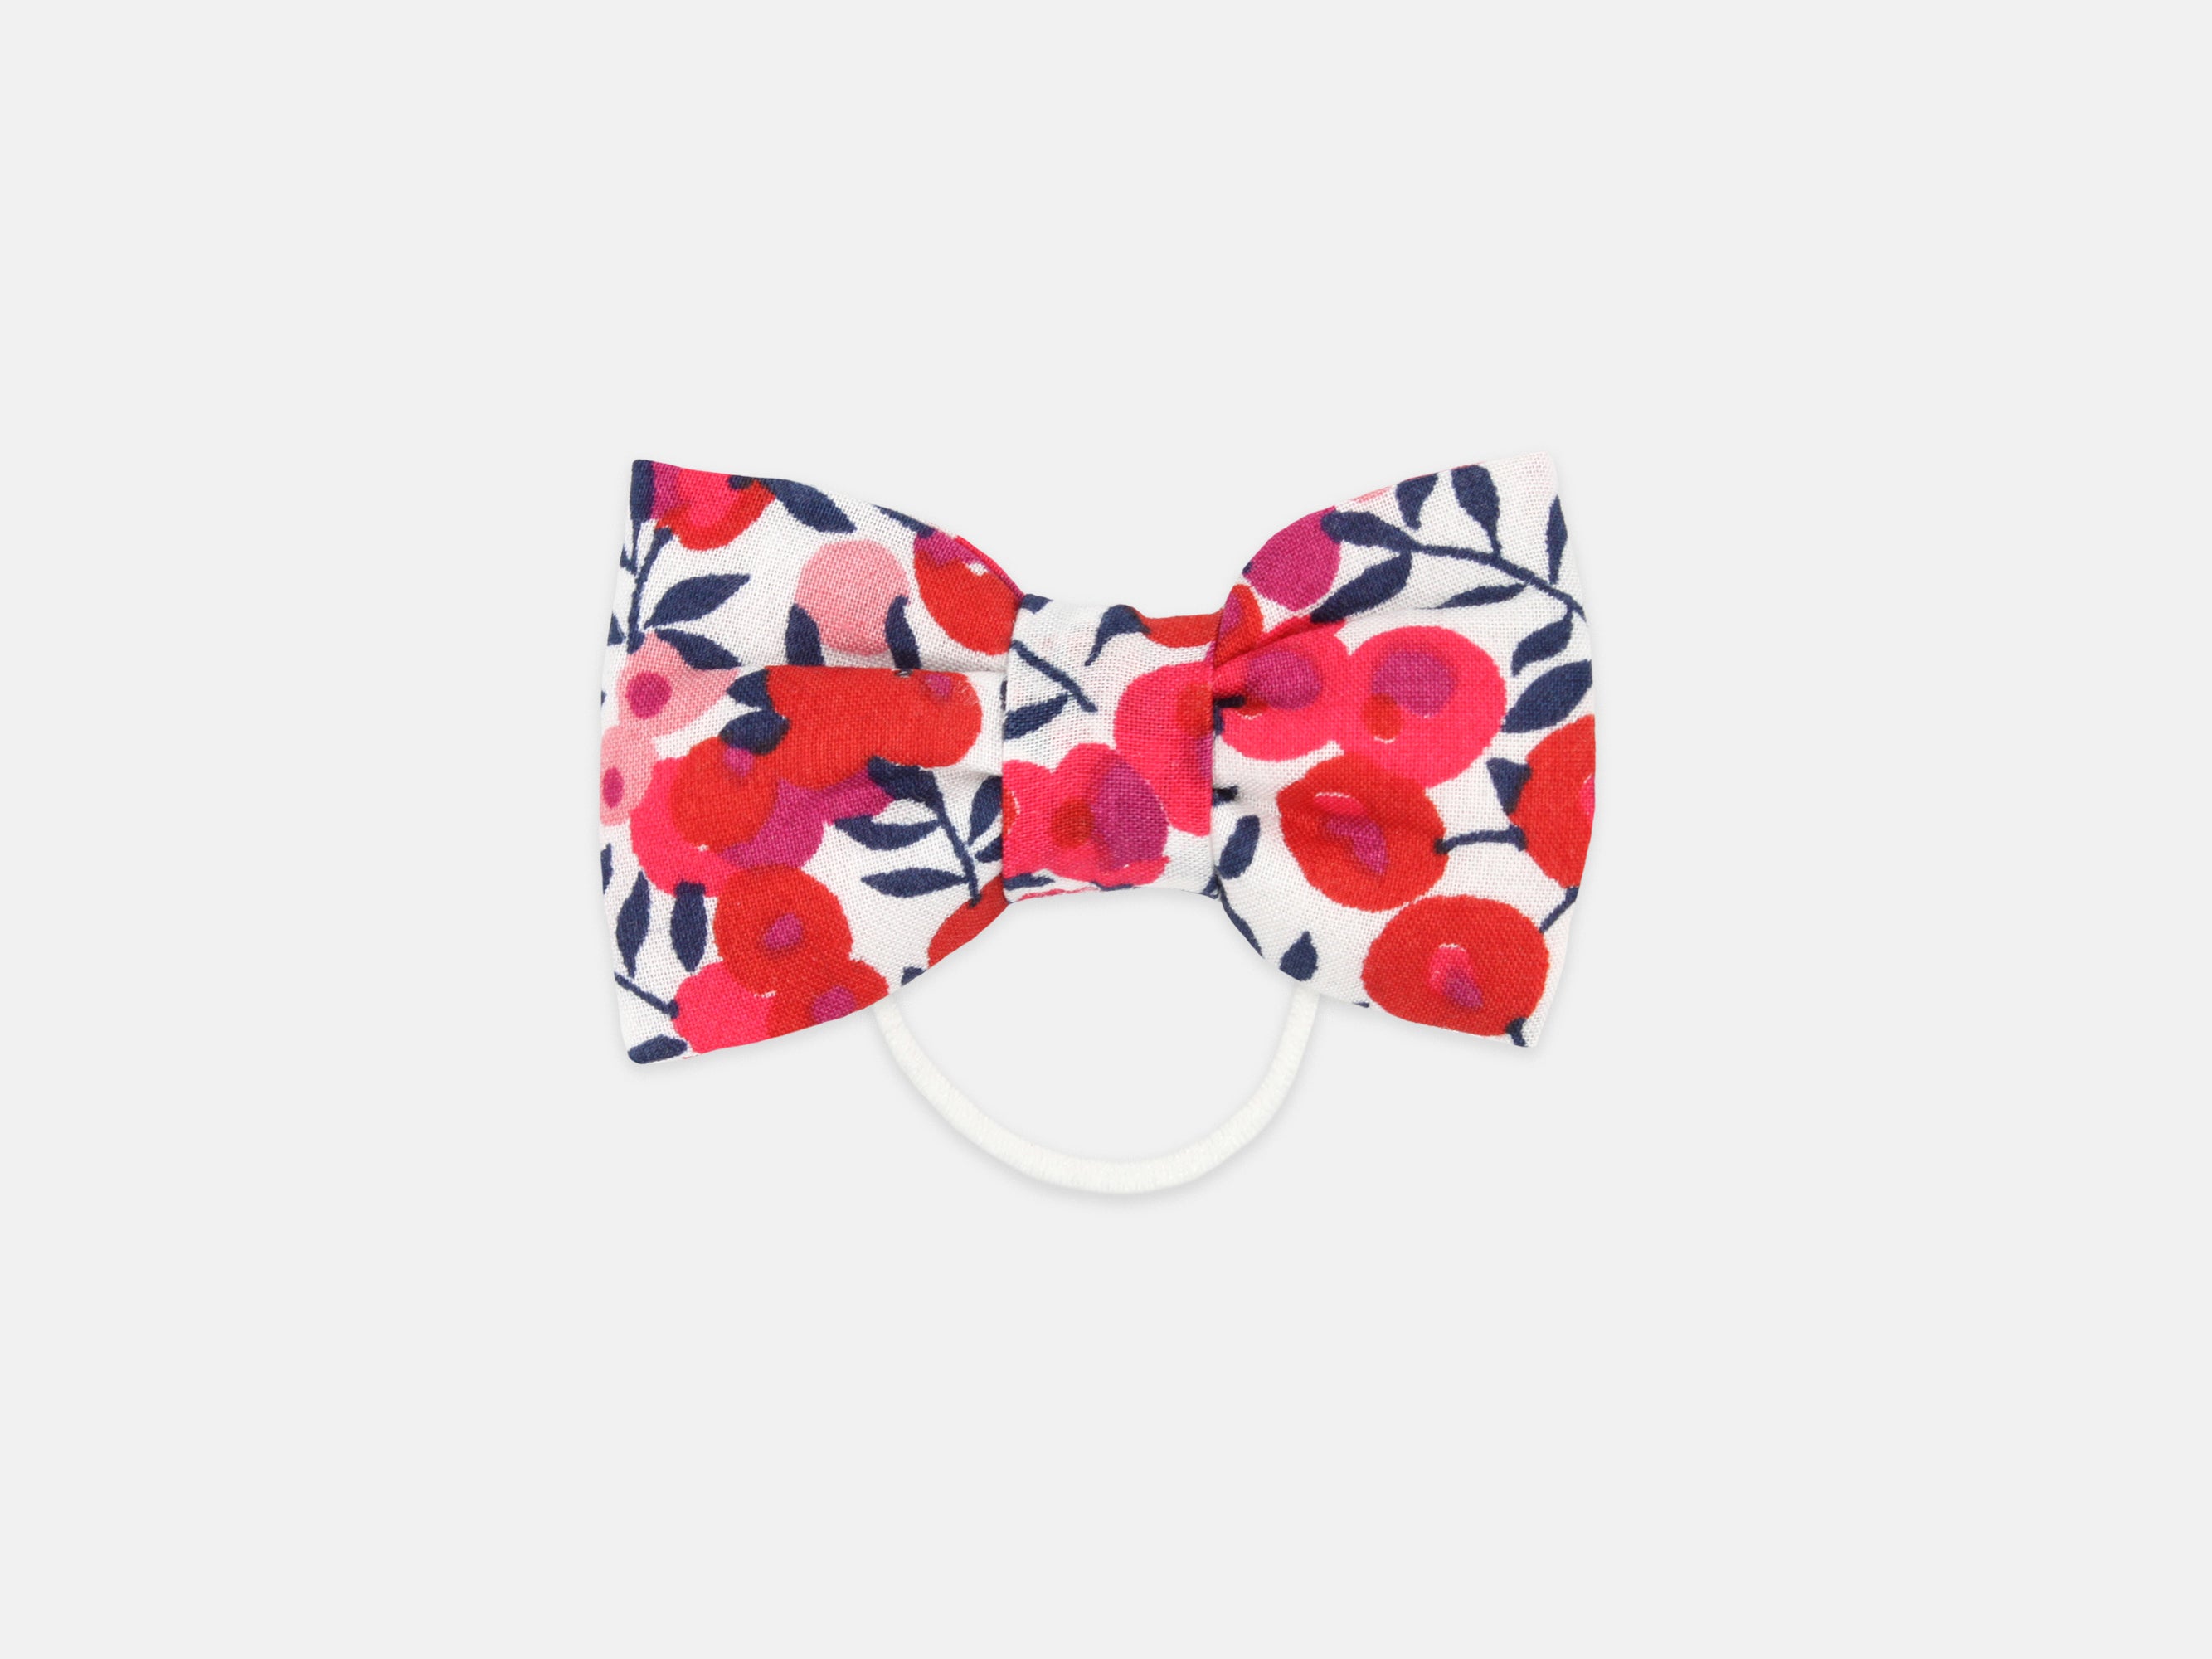 Small Bow Hair Band, Liberty London Wiltshire Berry S Print | Holme & Moss